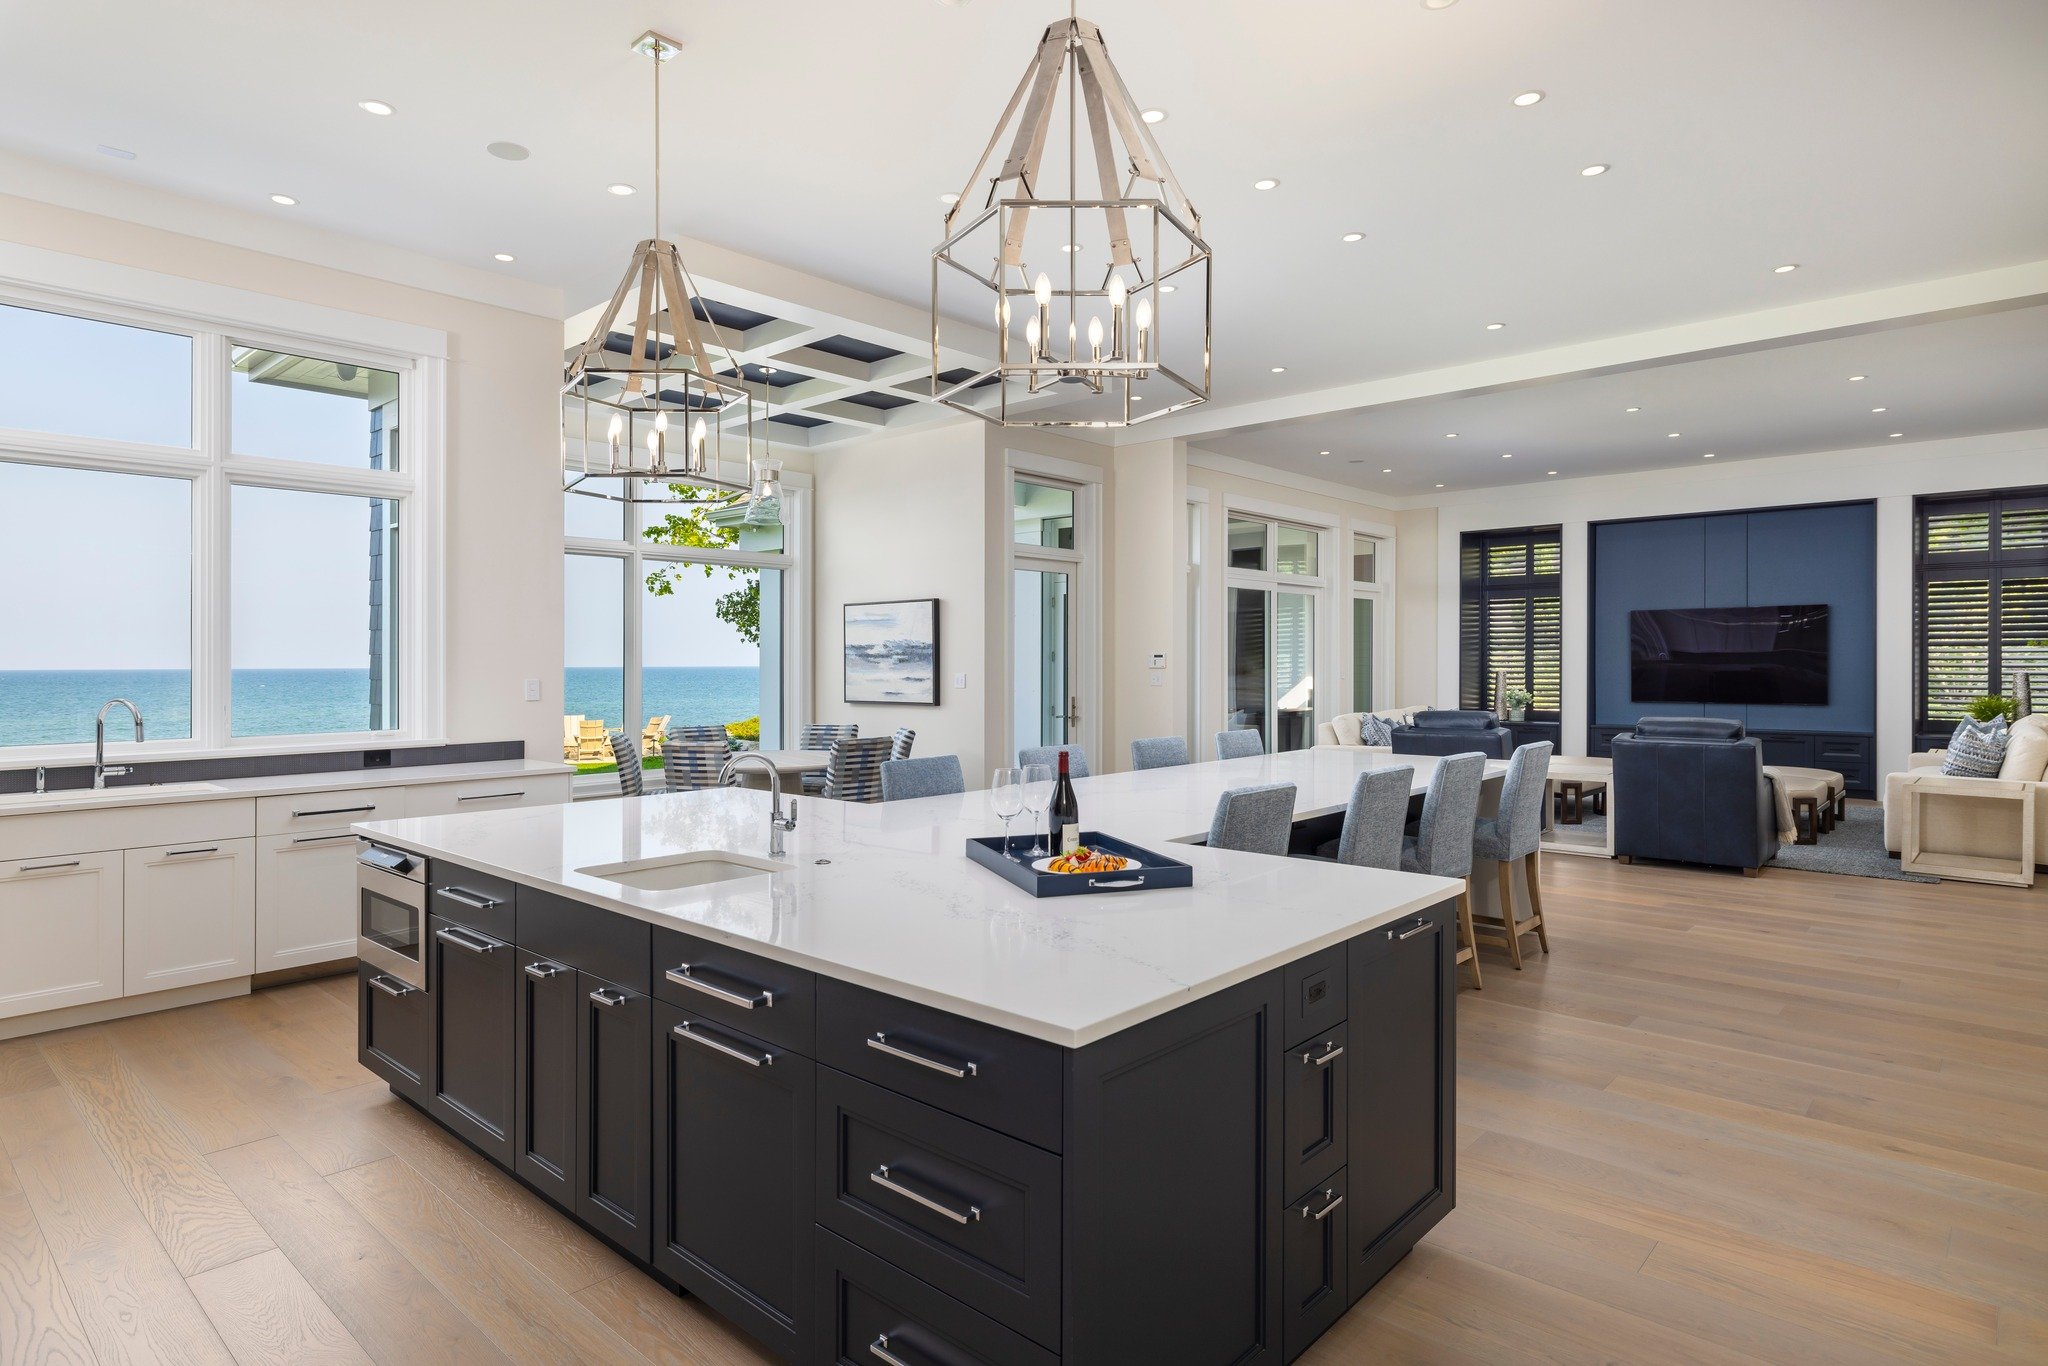 The attention-grabbing 15-foot integrated table is vying for the spotlight, but our excitement lies in the abundant storage options offered in the kitchen island. Not an inch of wasted space!

Builder: @mikeschaapbuilders 
Design: @benchmarkdesignstu